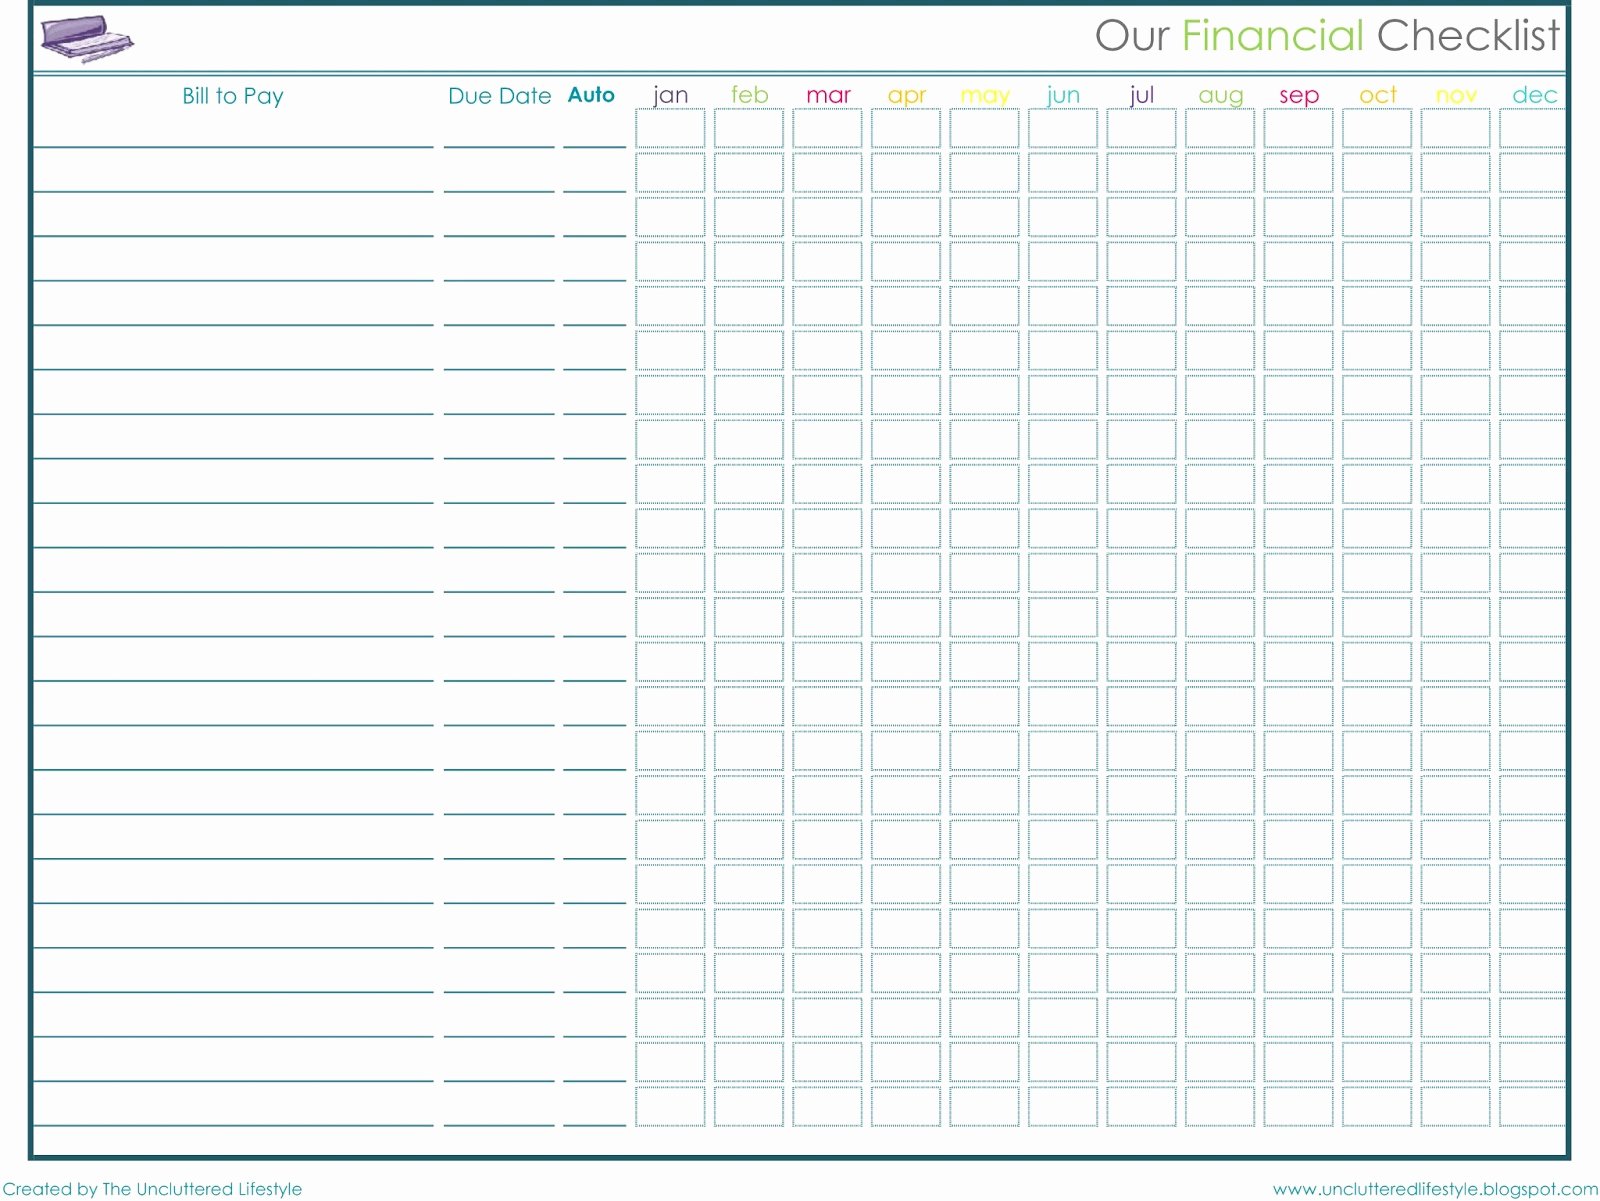 Bill Pay Checklist Template Luxury How I Keep the House Running Part 2 Find Lifestyle